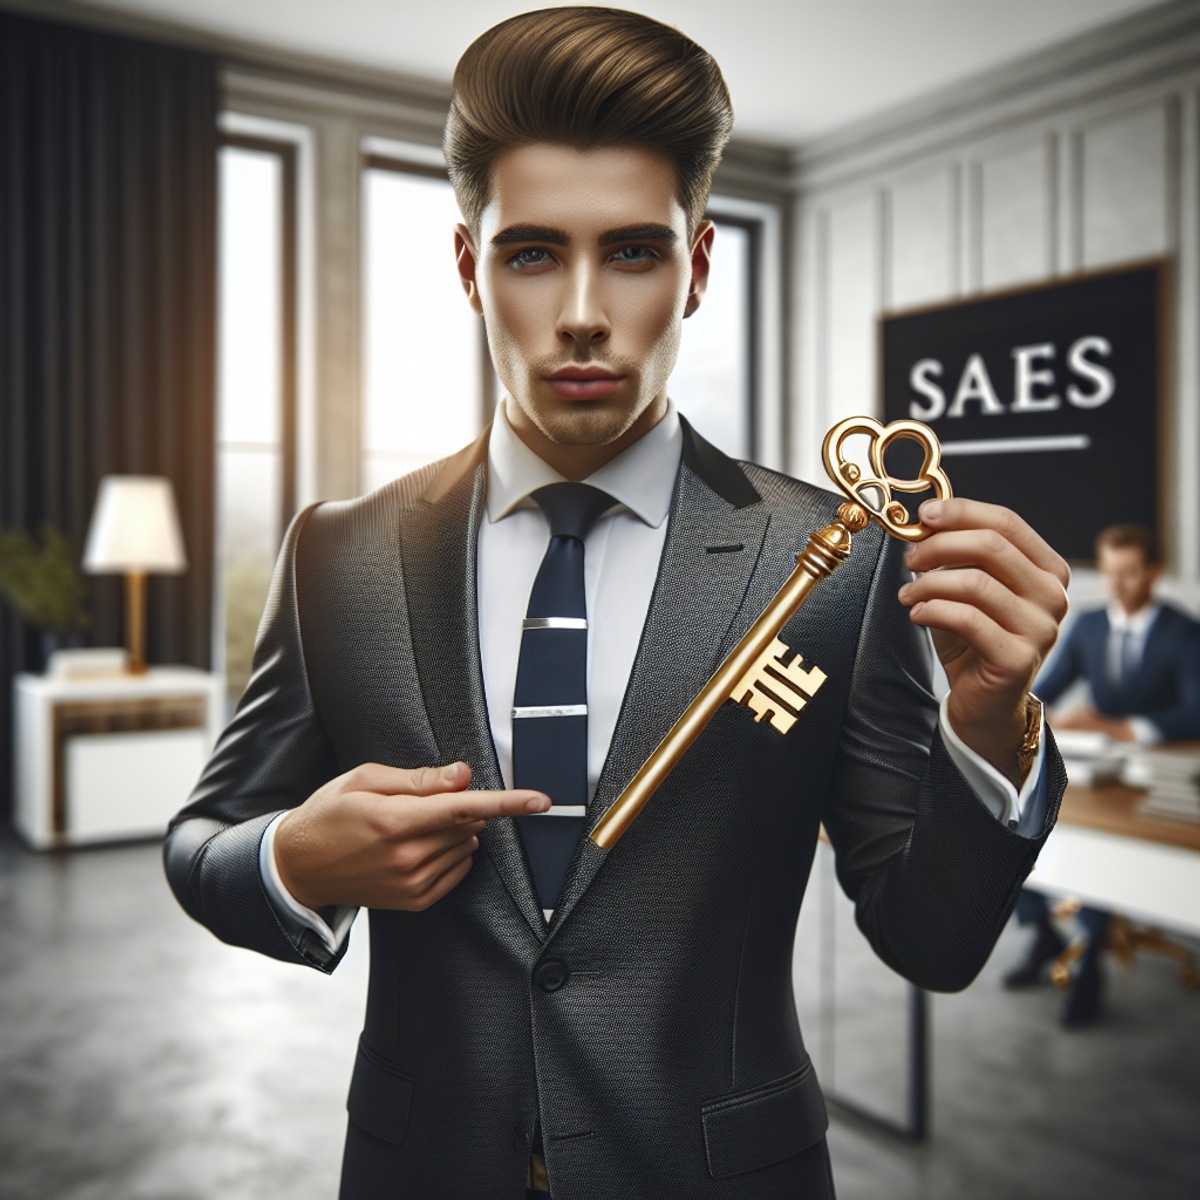 Find the keys to the kingdom by hiring high ticket closers for your business